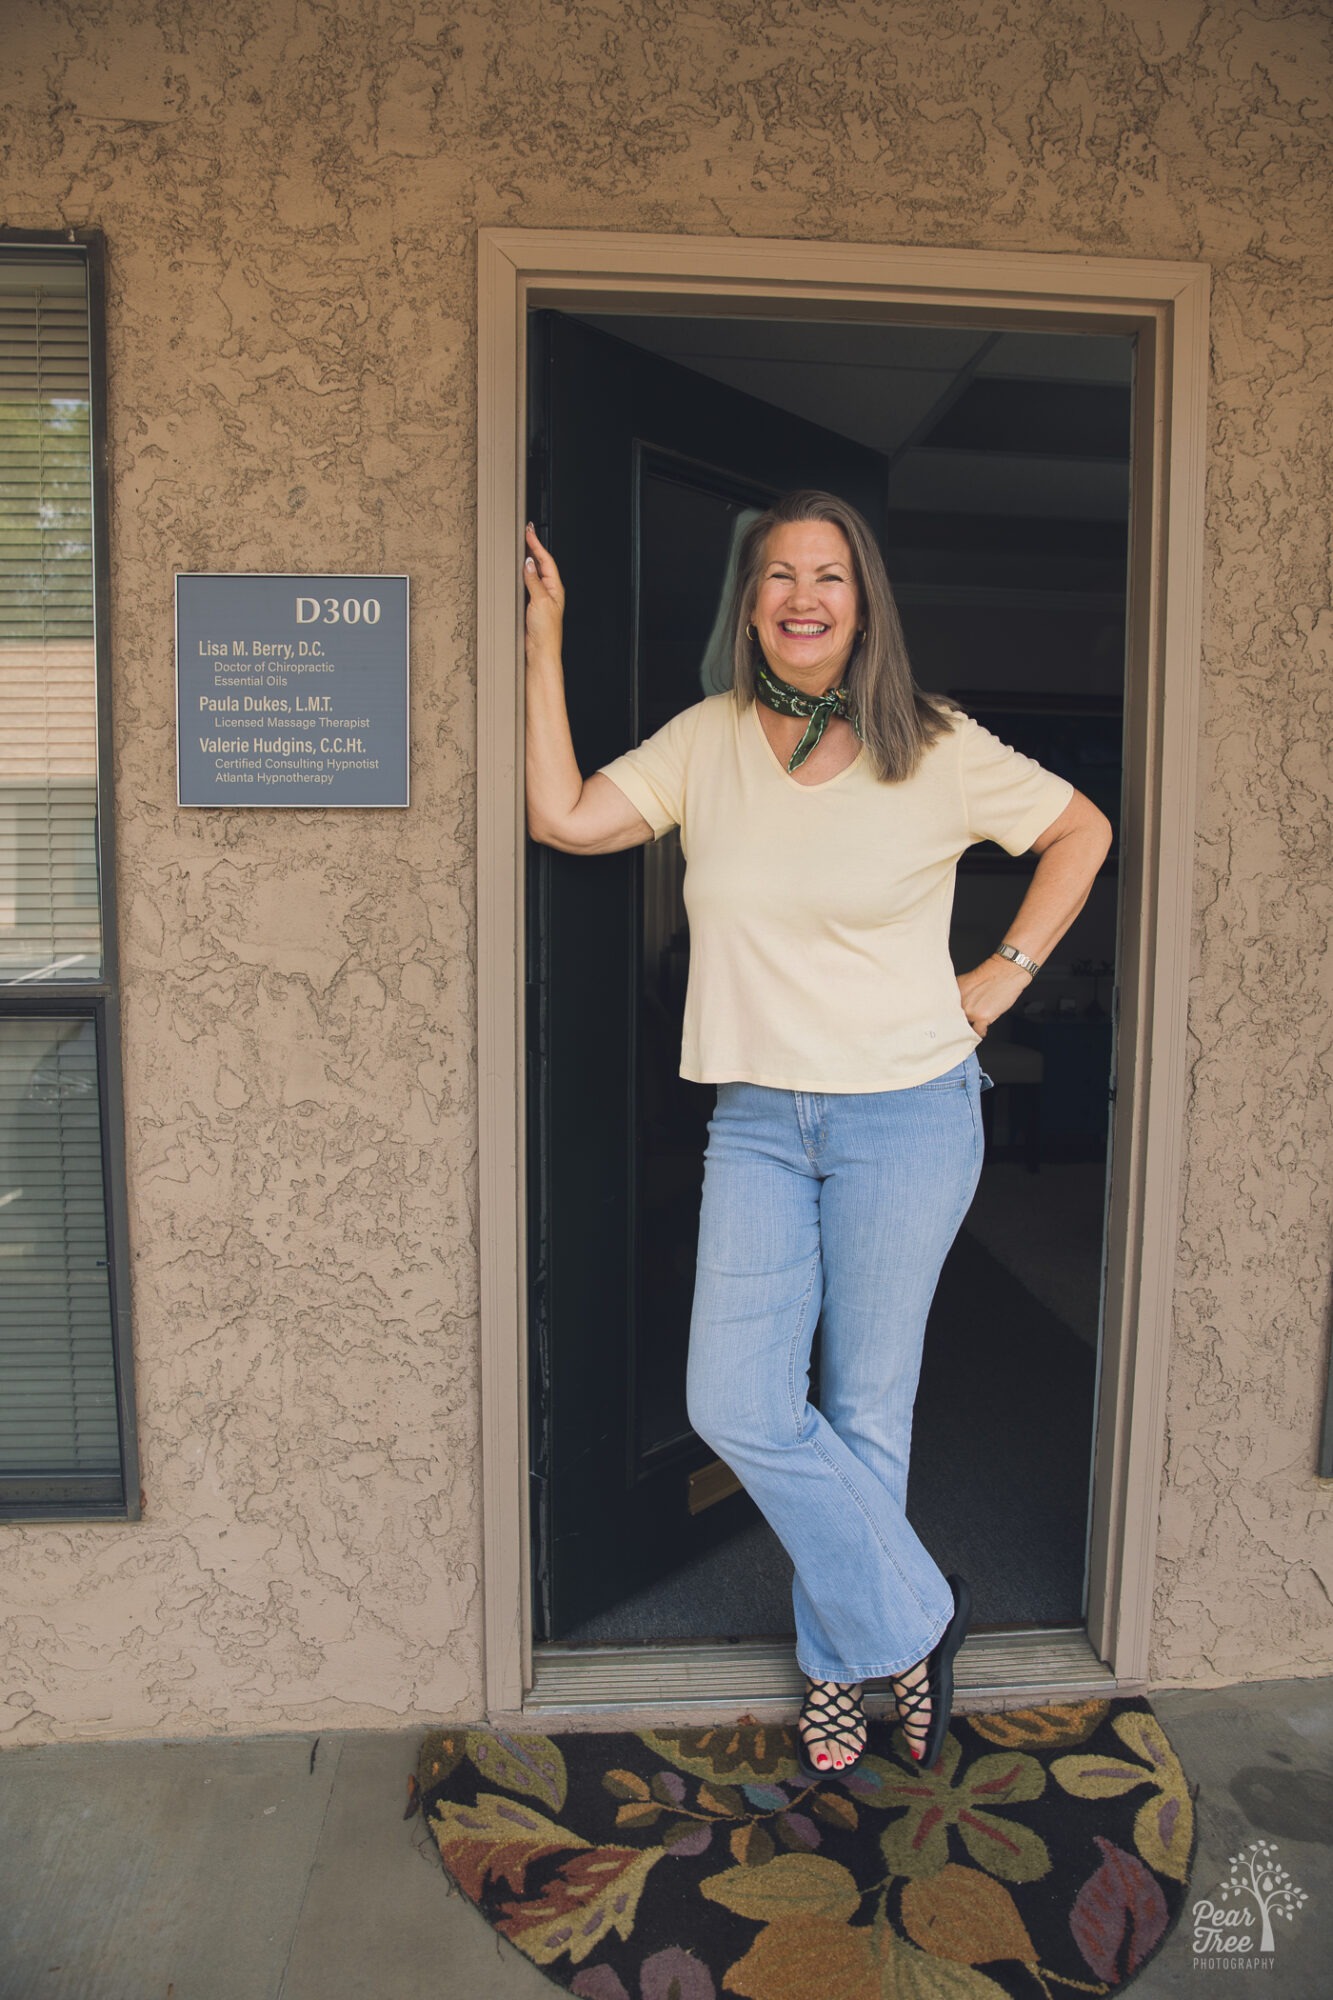 Valerie Hudgins standing in her Roswell office doorway smiling next to her suite sign during her branding photography session